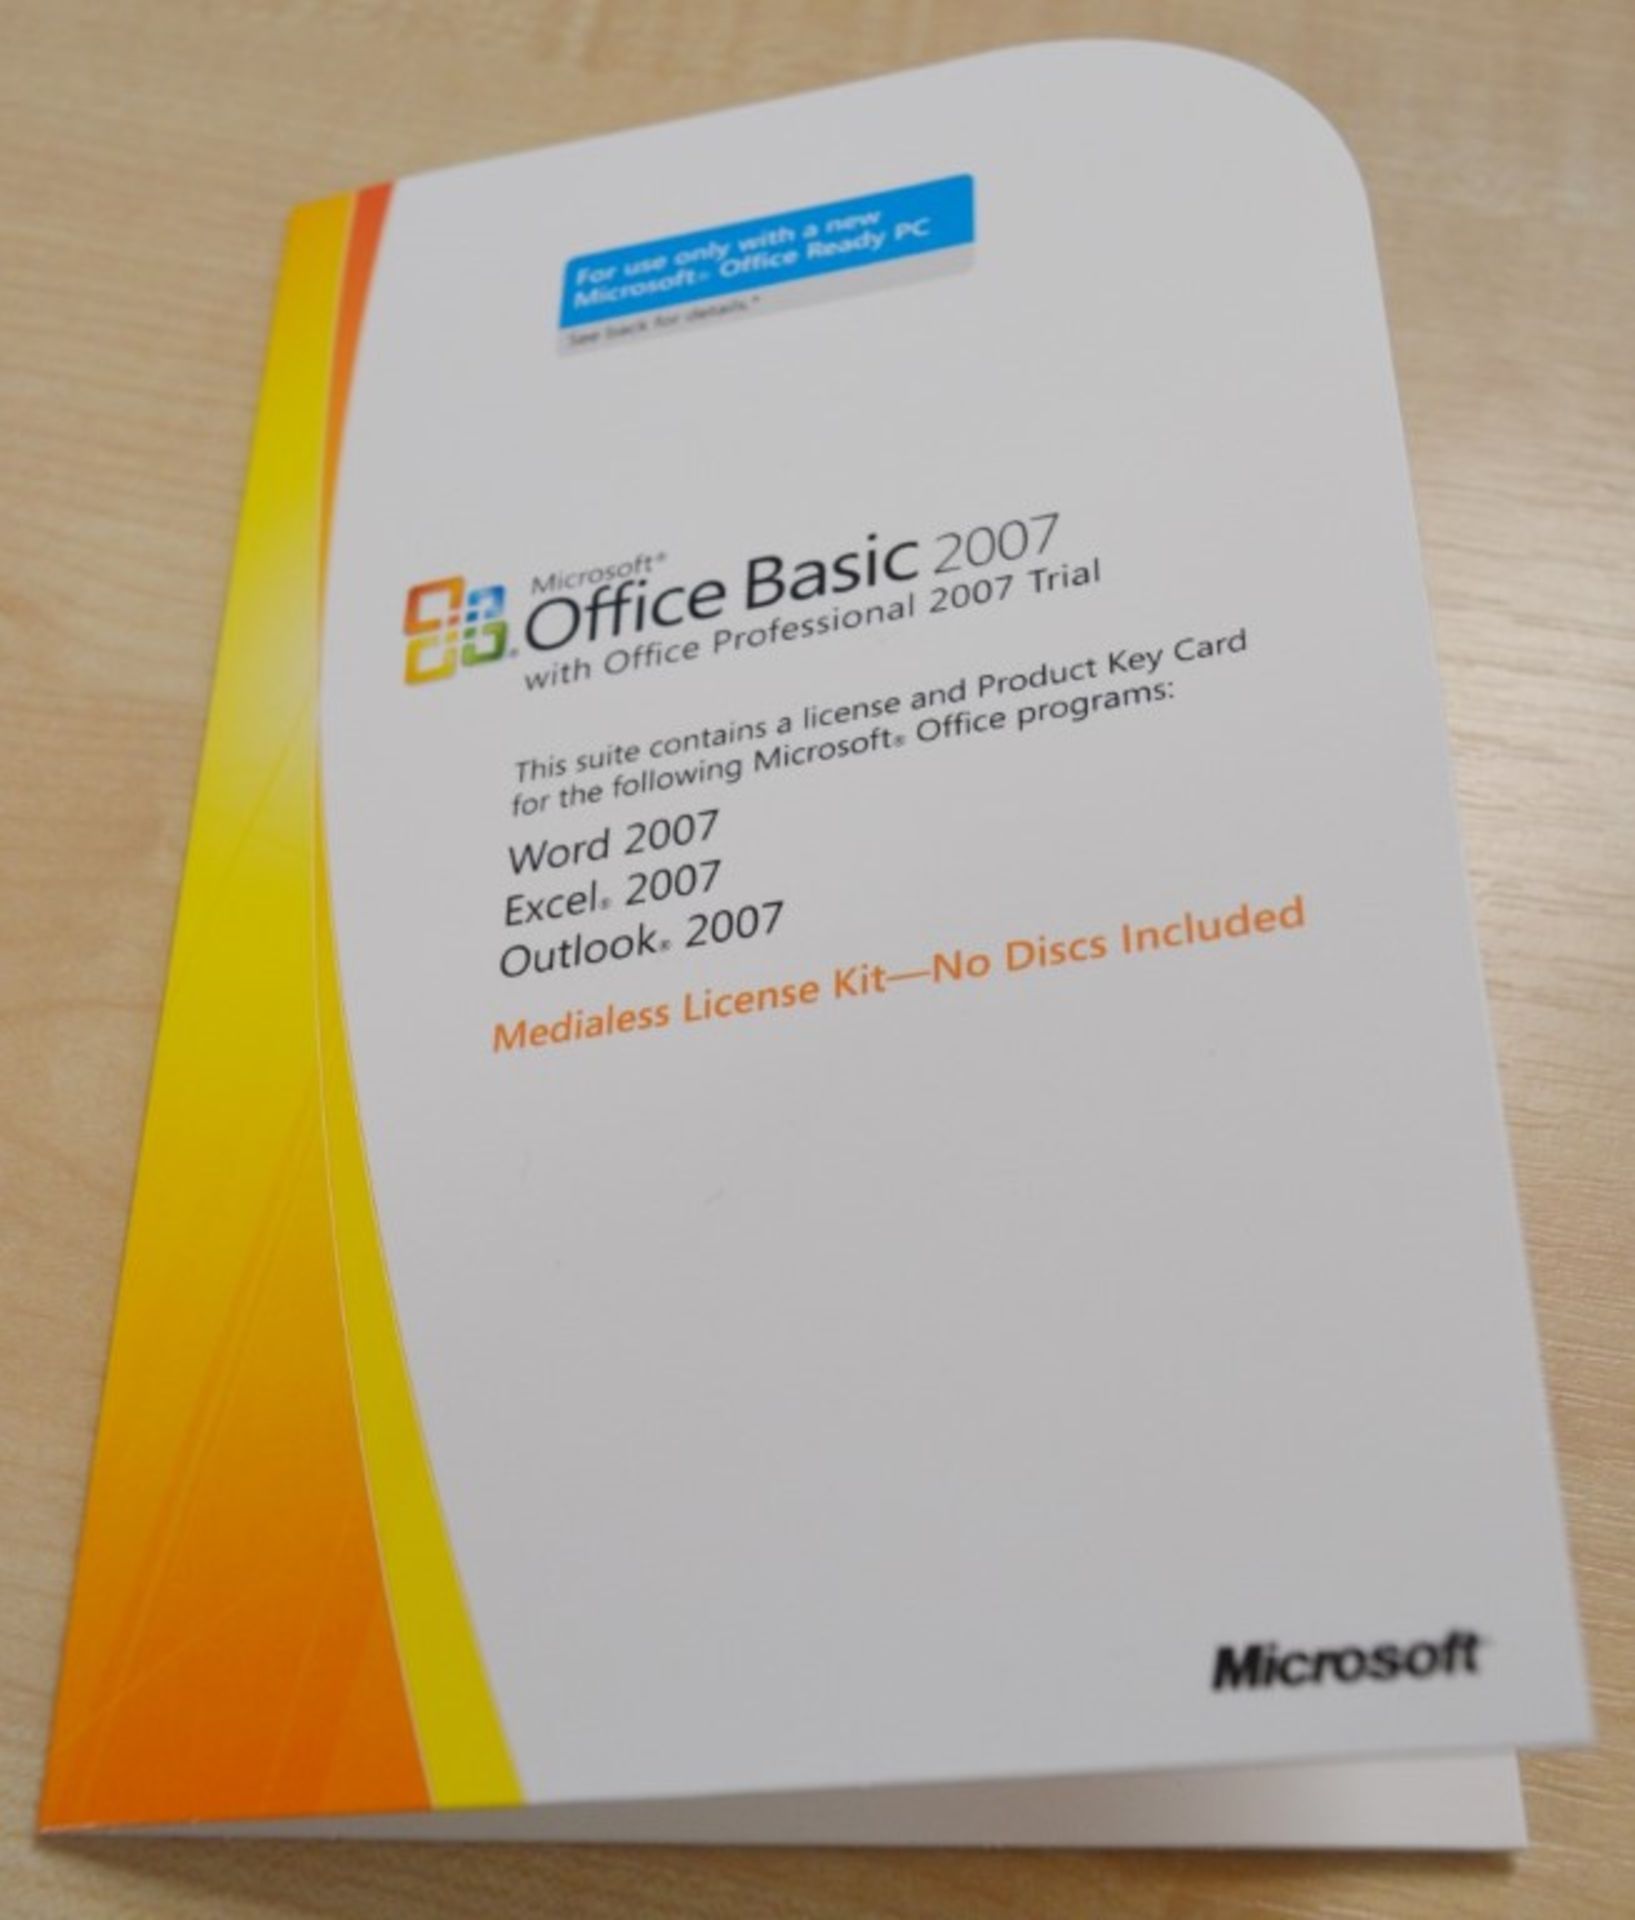 1 x Microsoft Office 2007 Basic COA - Features Word, Excel and Outlook - CL300 - Location: Altrincha